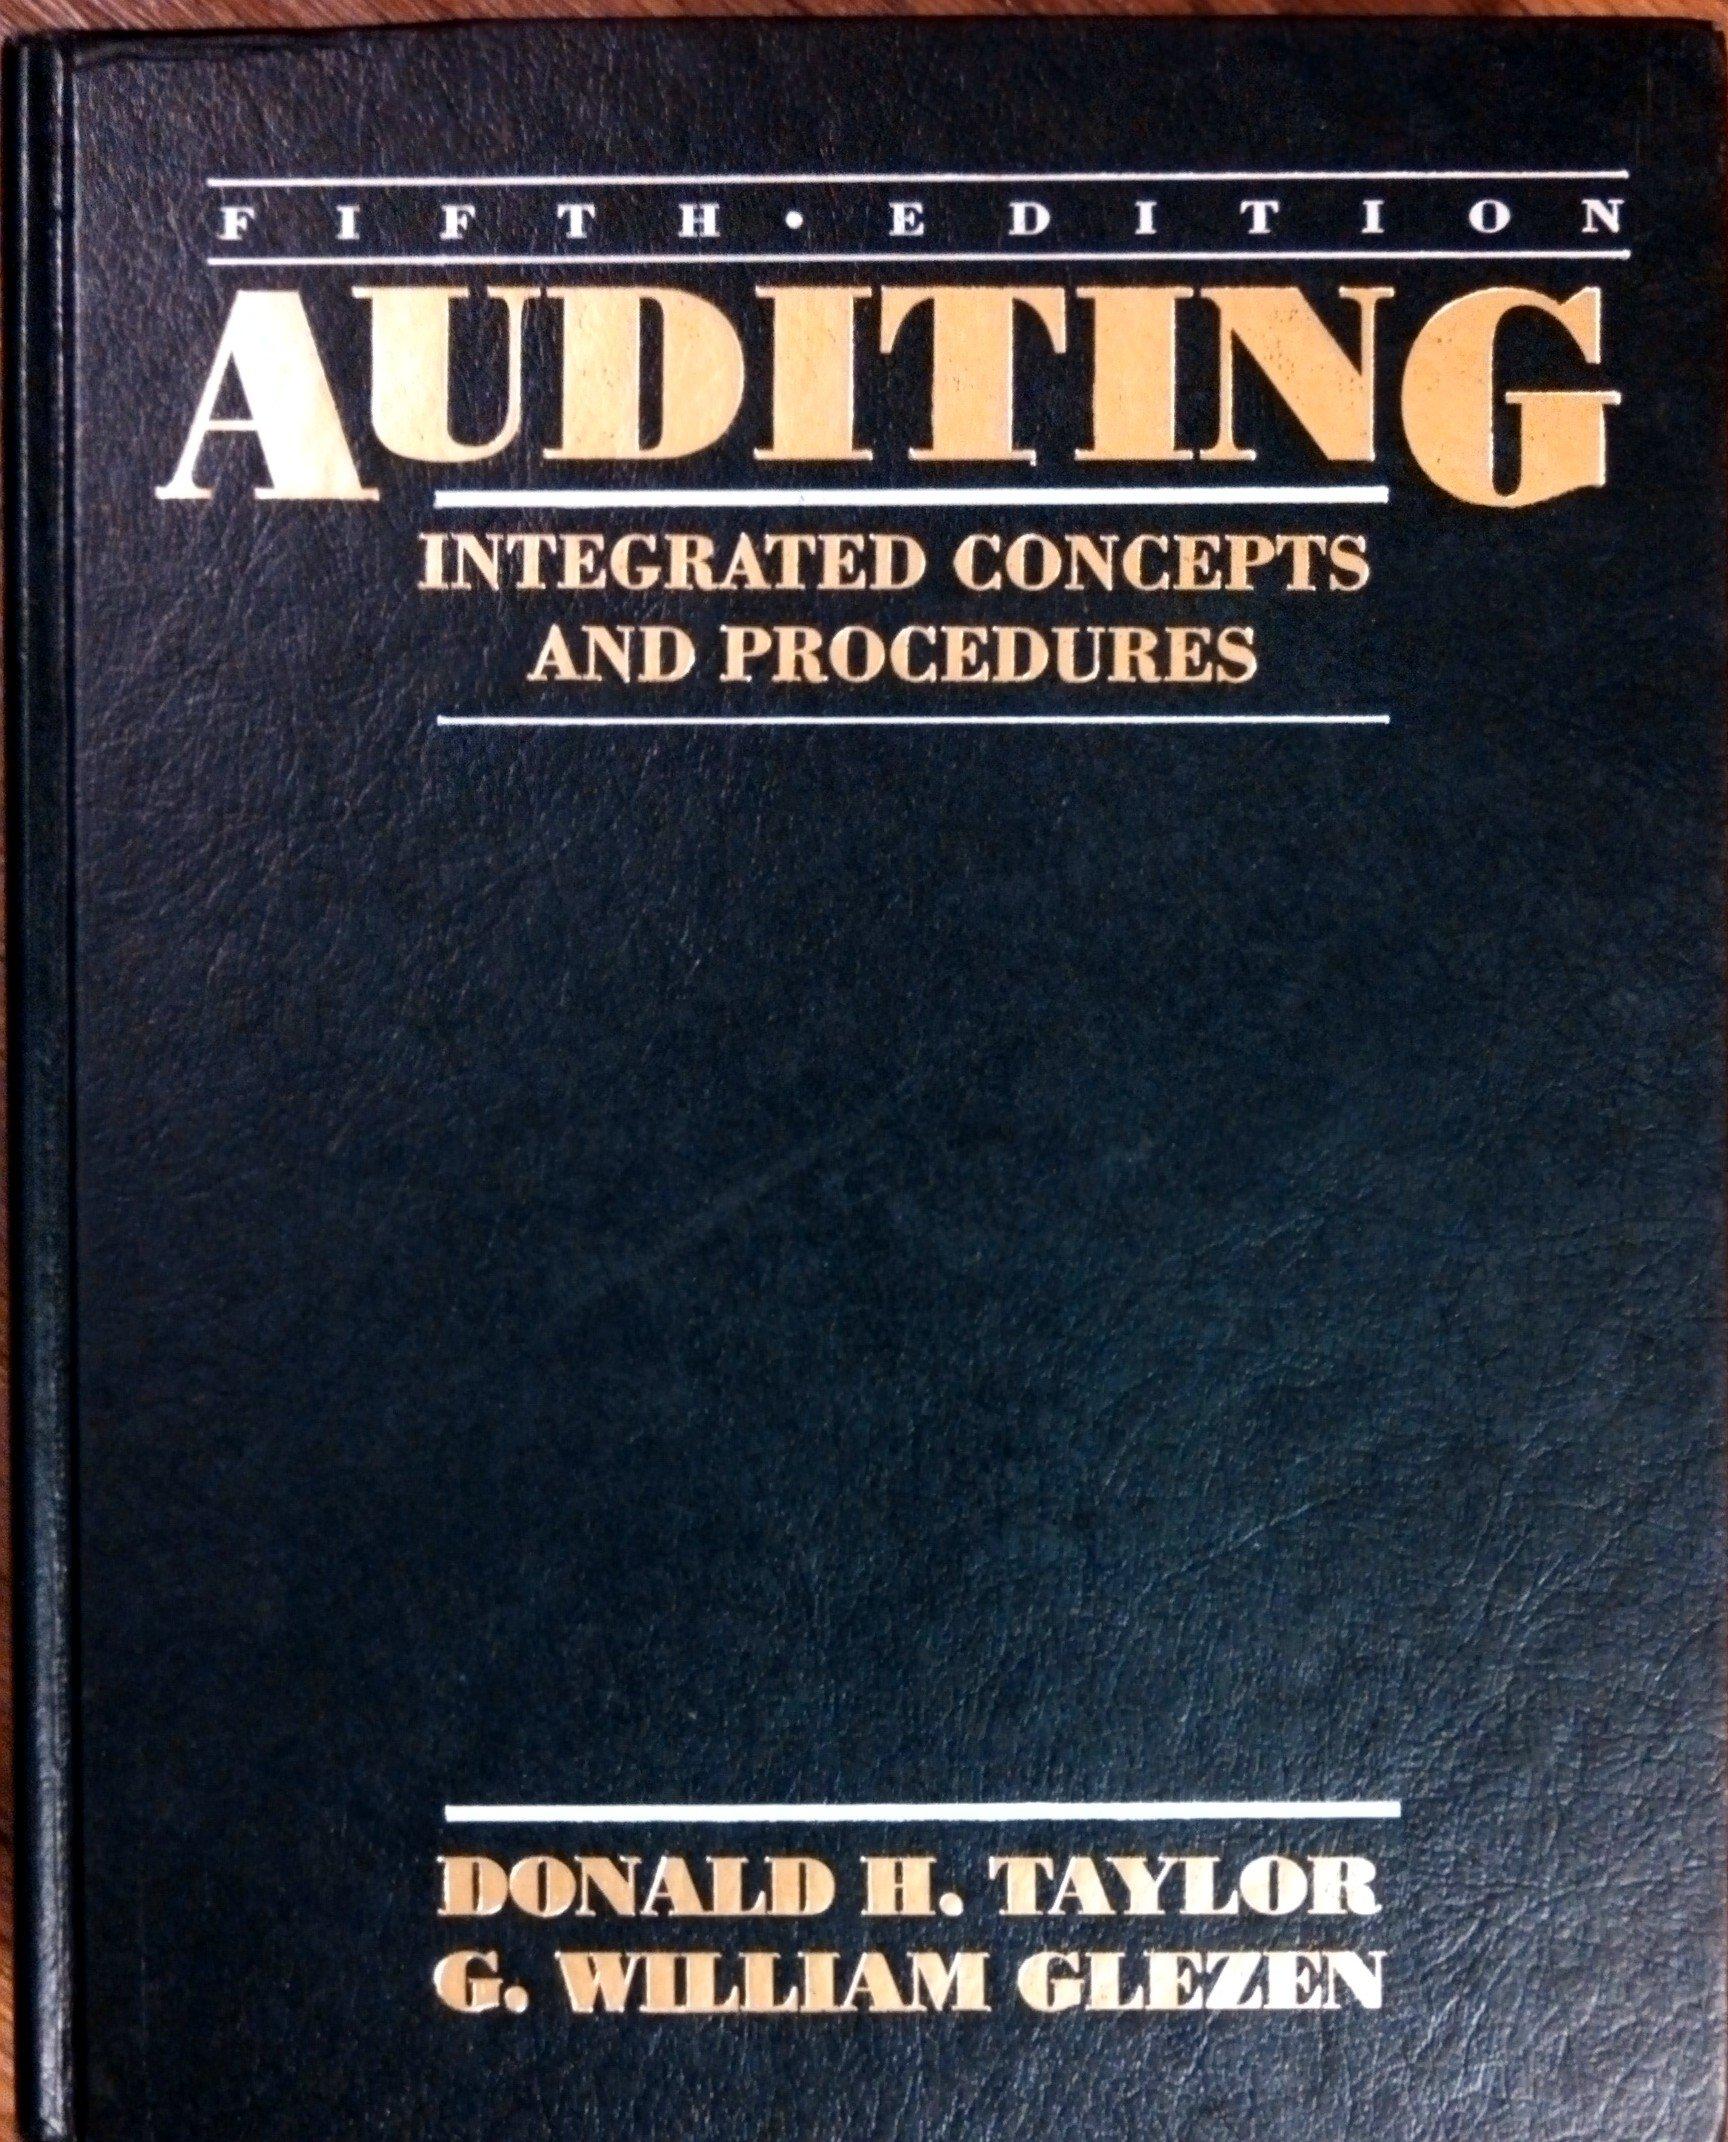 auditing integrated concepts and procedures 5th edition donald h. taylor, g. william glezen 0471524239,